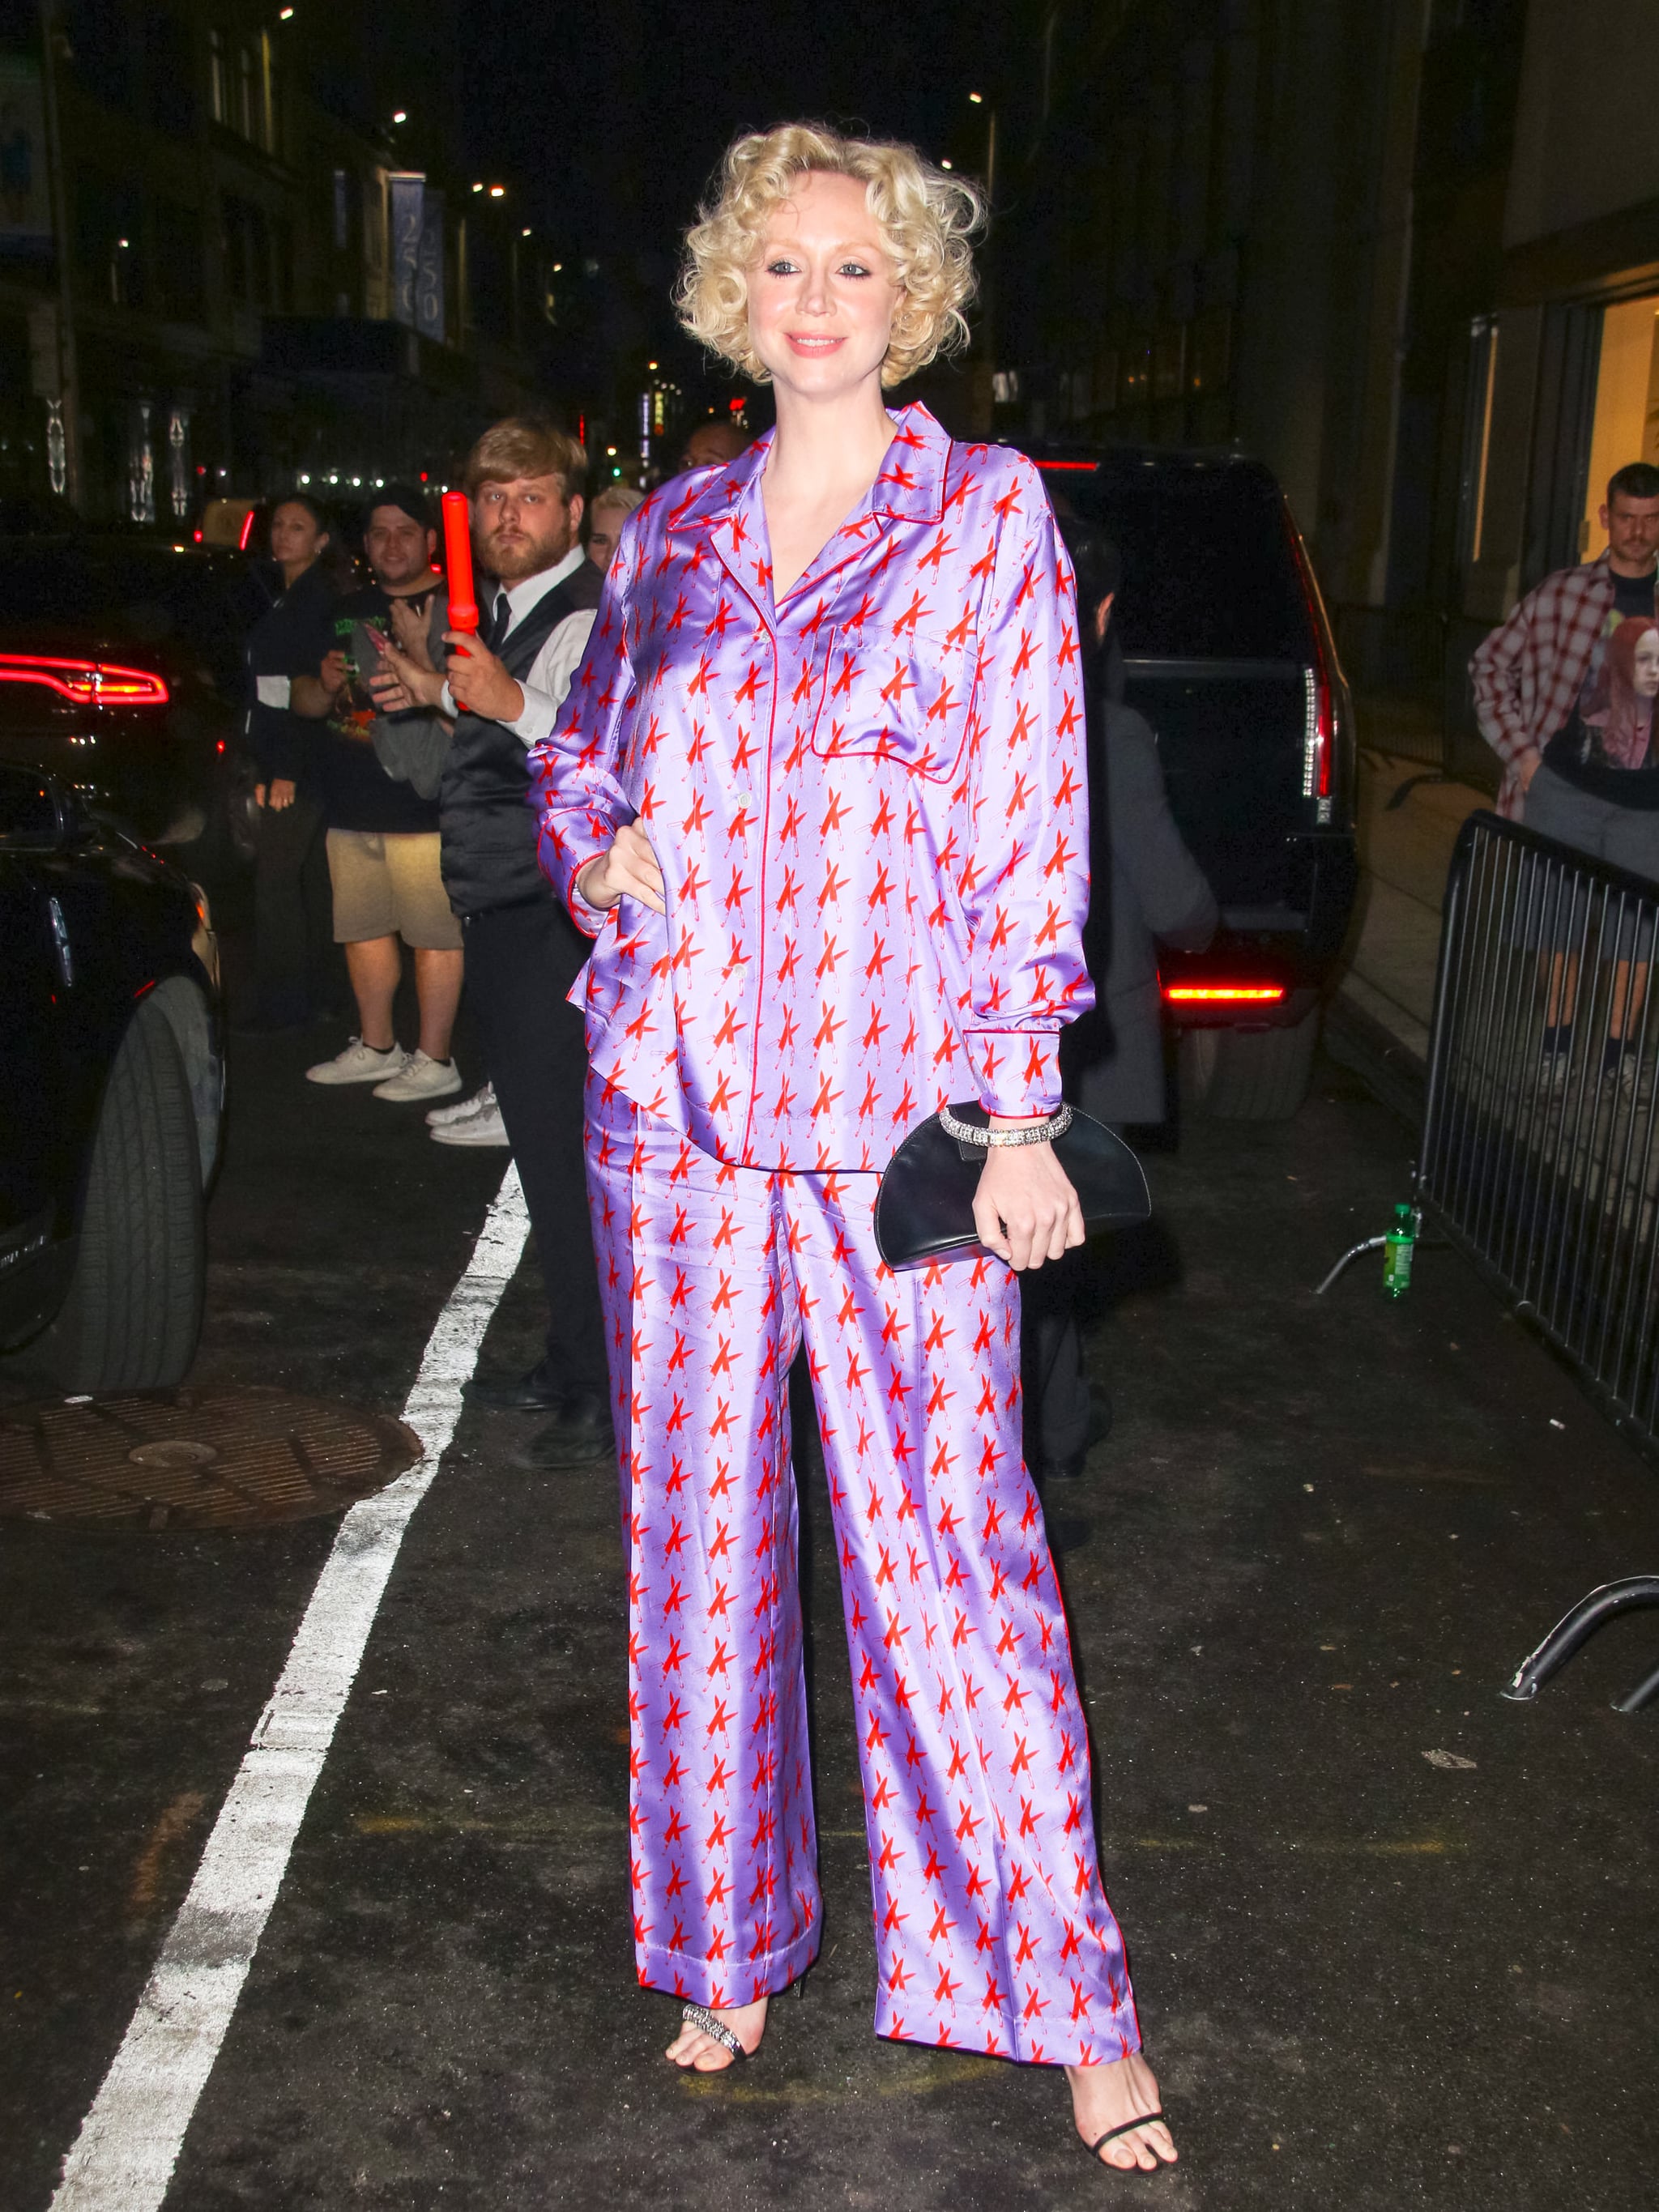 Pictured: Gwendoline Christie | From the Front Row to the Runway: 70+ Fun-Filled Photos From New York Fashion Week POPSUGAR Celebrity Photo 67